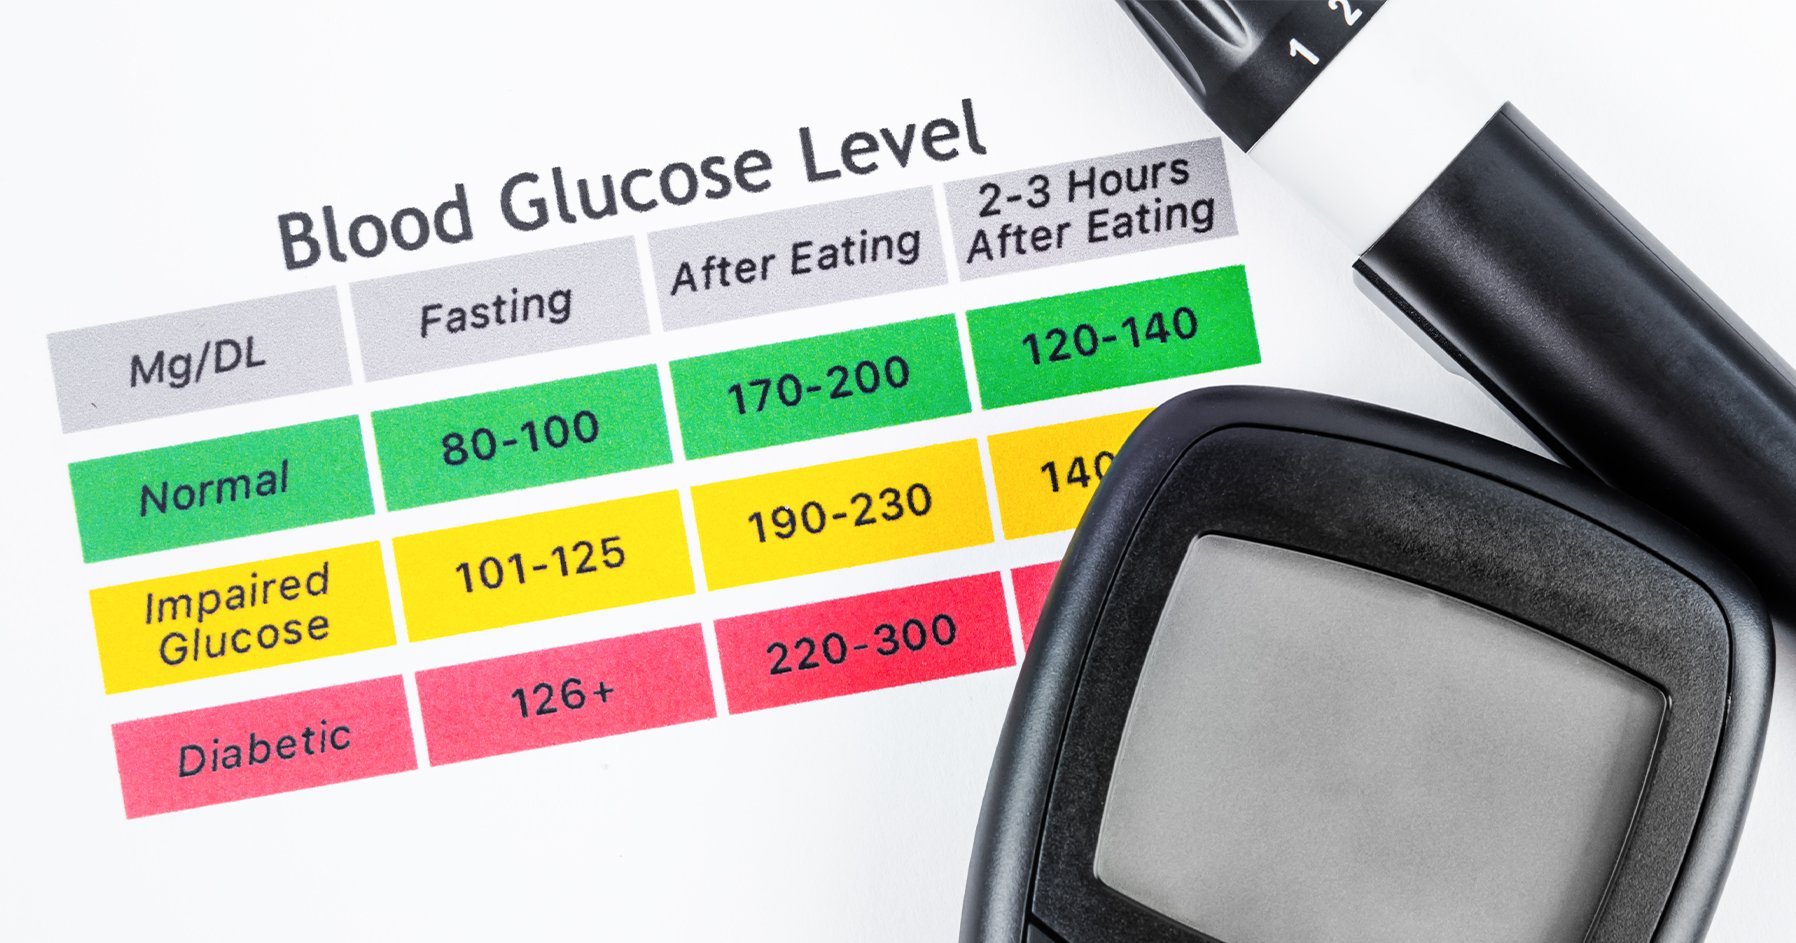 Image discussing various blood glucose levels.